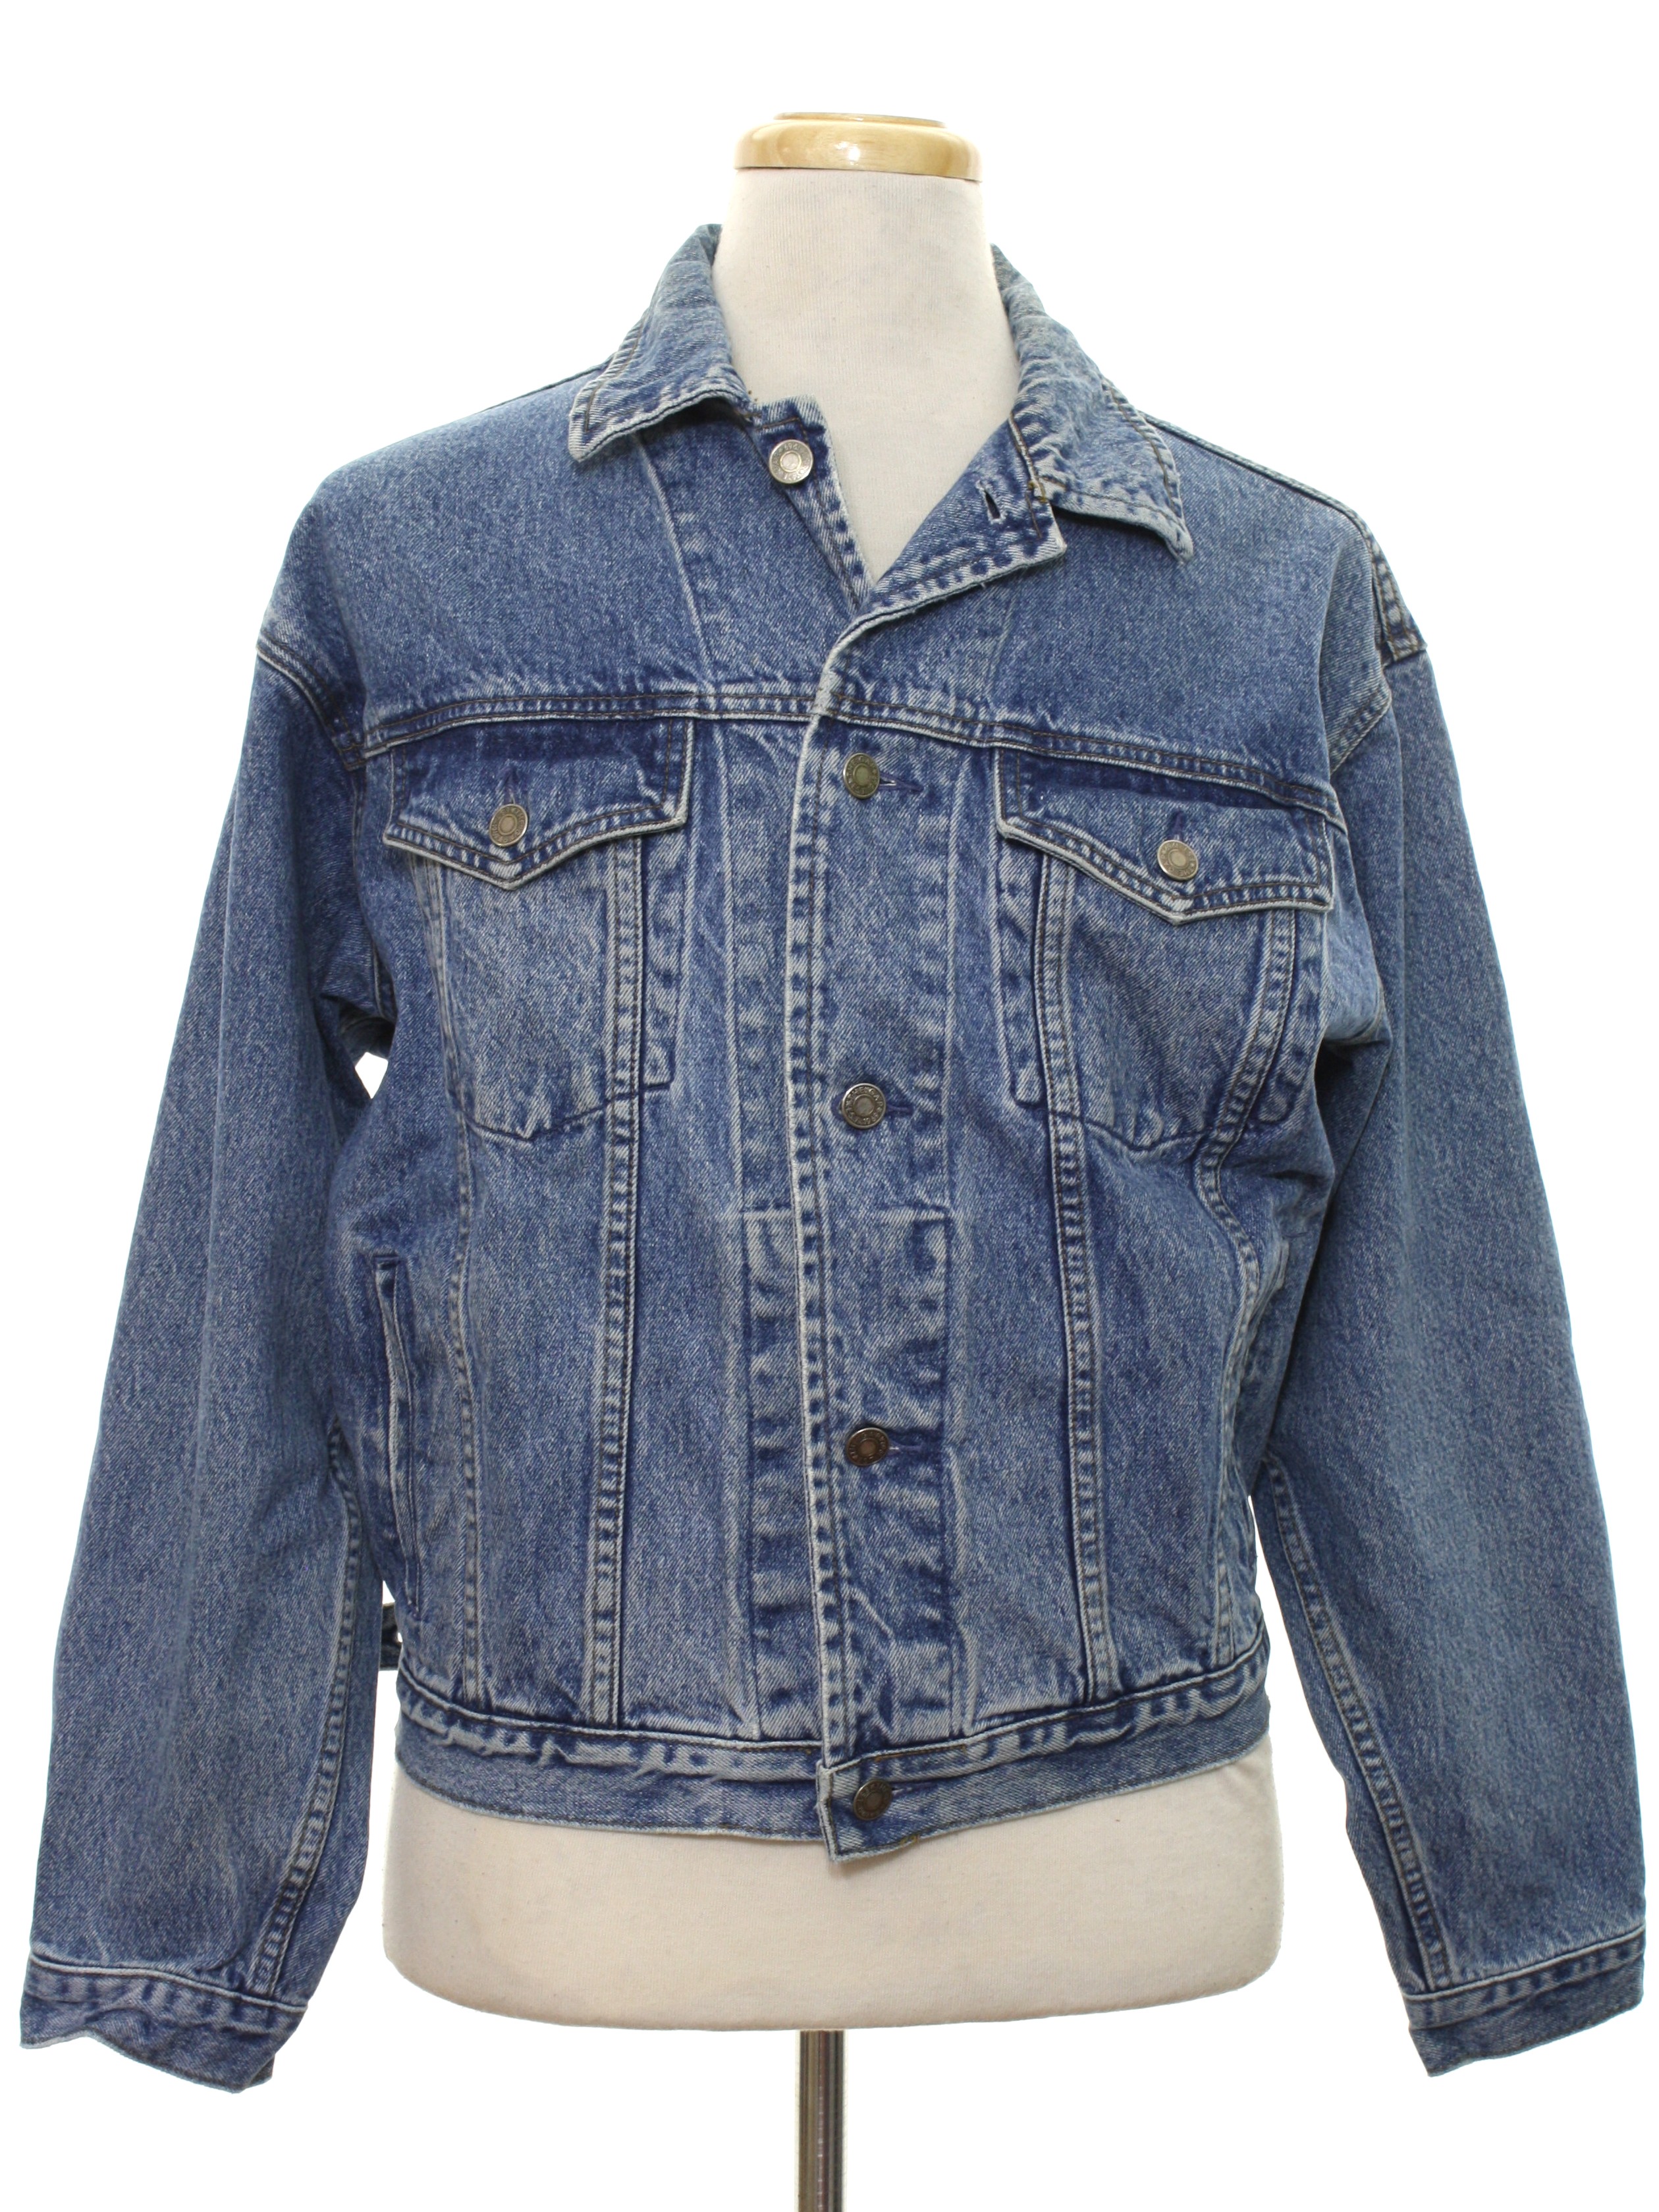 Gap 80's Vintage Jacket: Late 80s or Early 90s -Gap- Mens blue ...